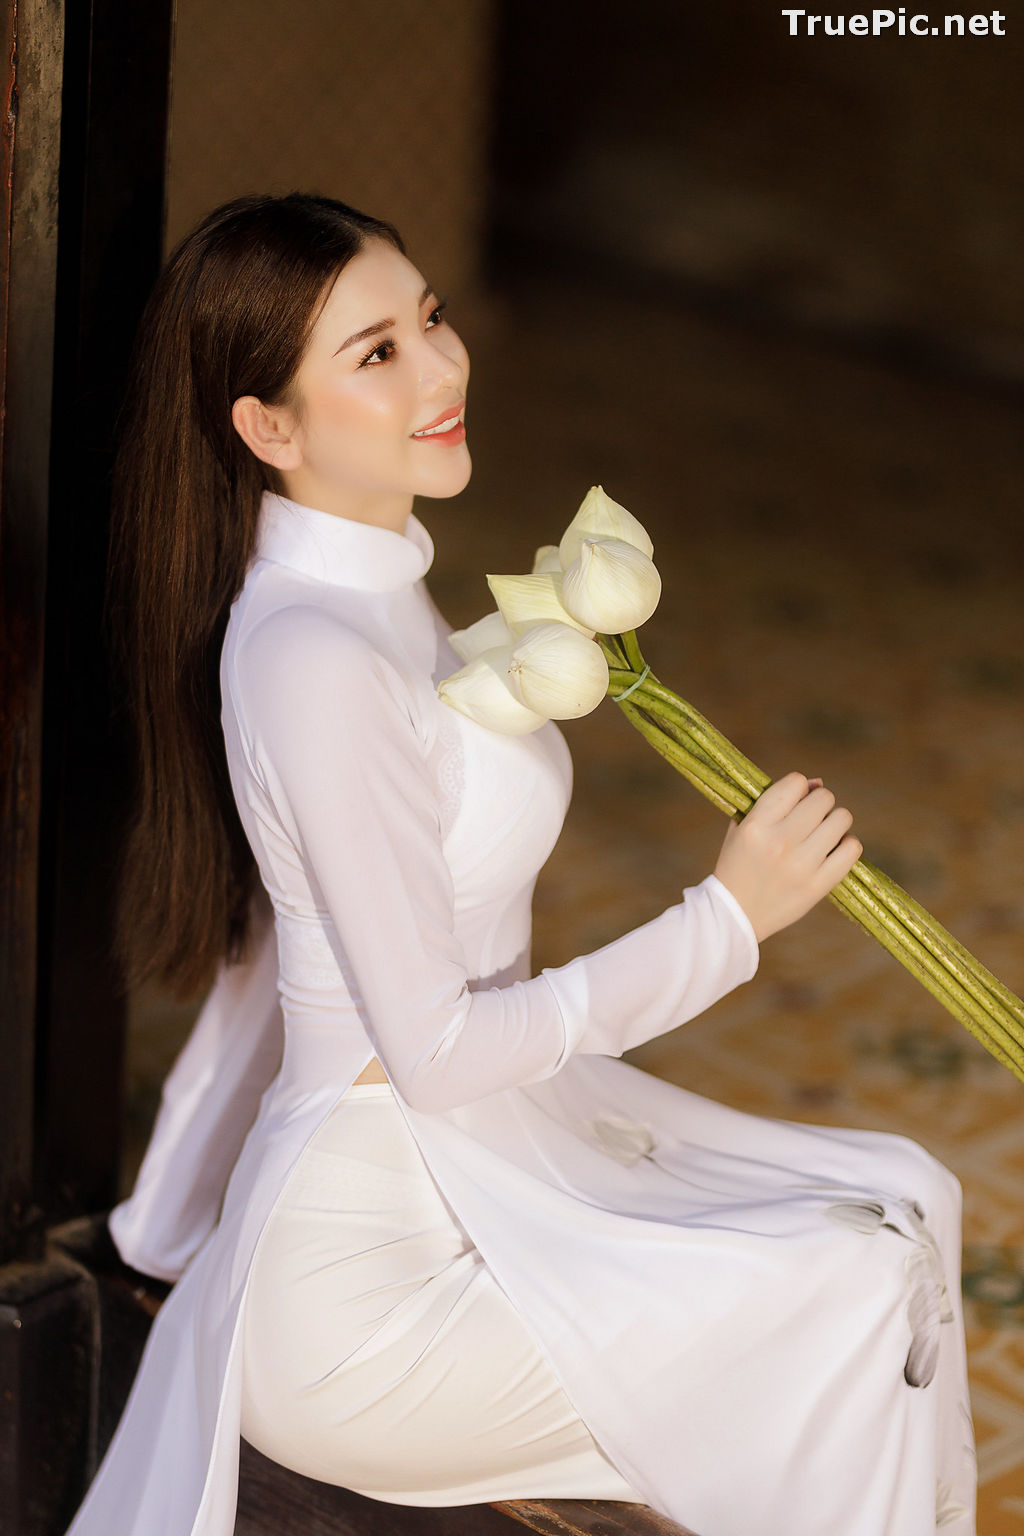 Image The Beauty of Vietnamese Girls with Traditional Dress (Ao Dai) #2 - TruePic.net - Picture-70